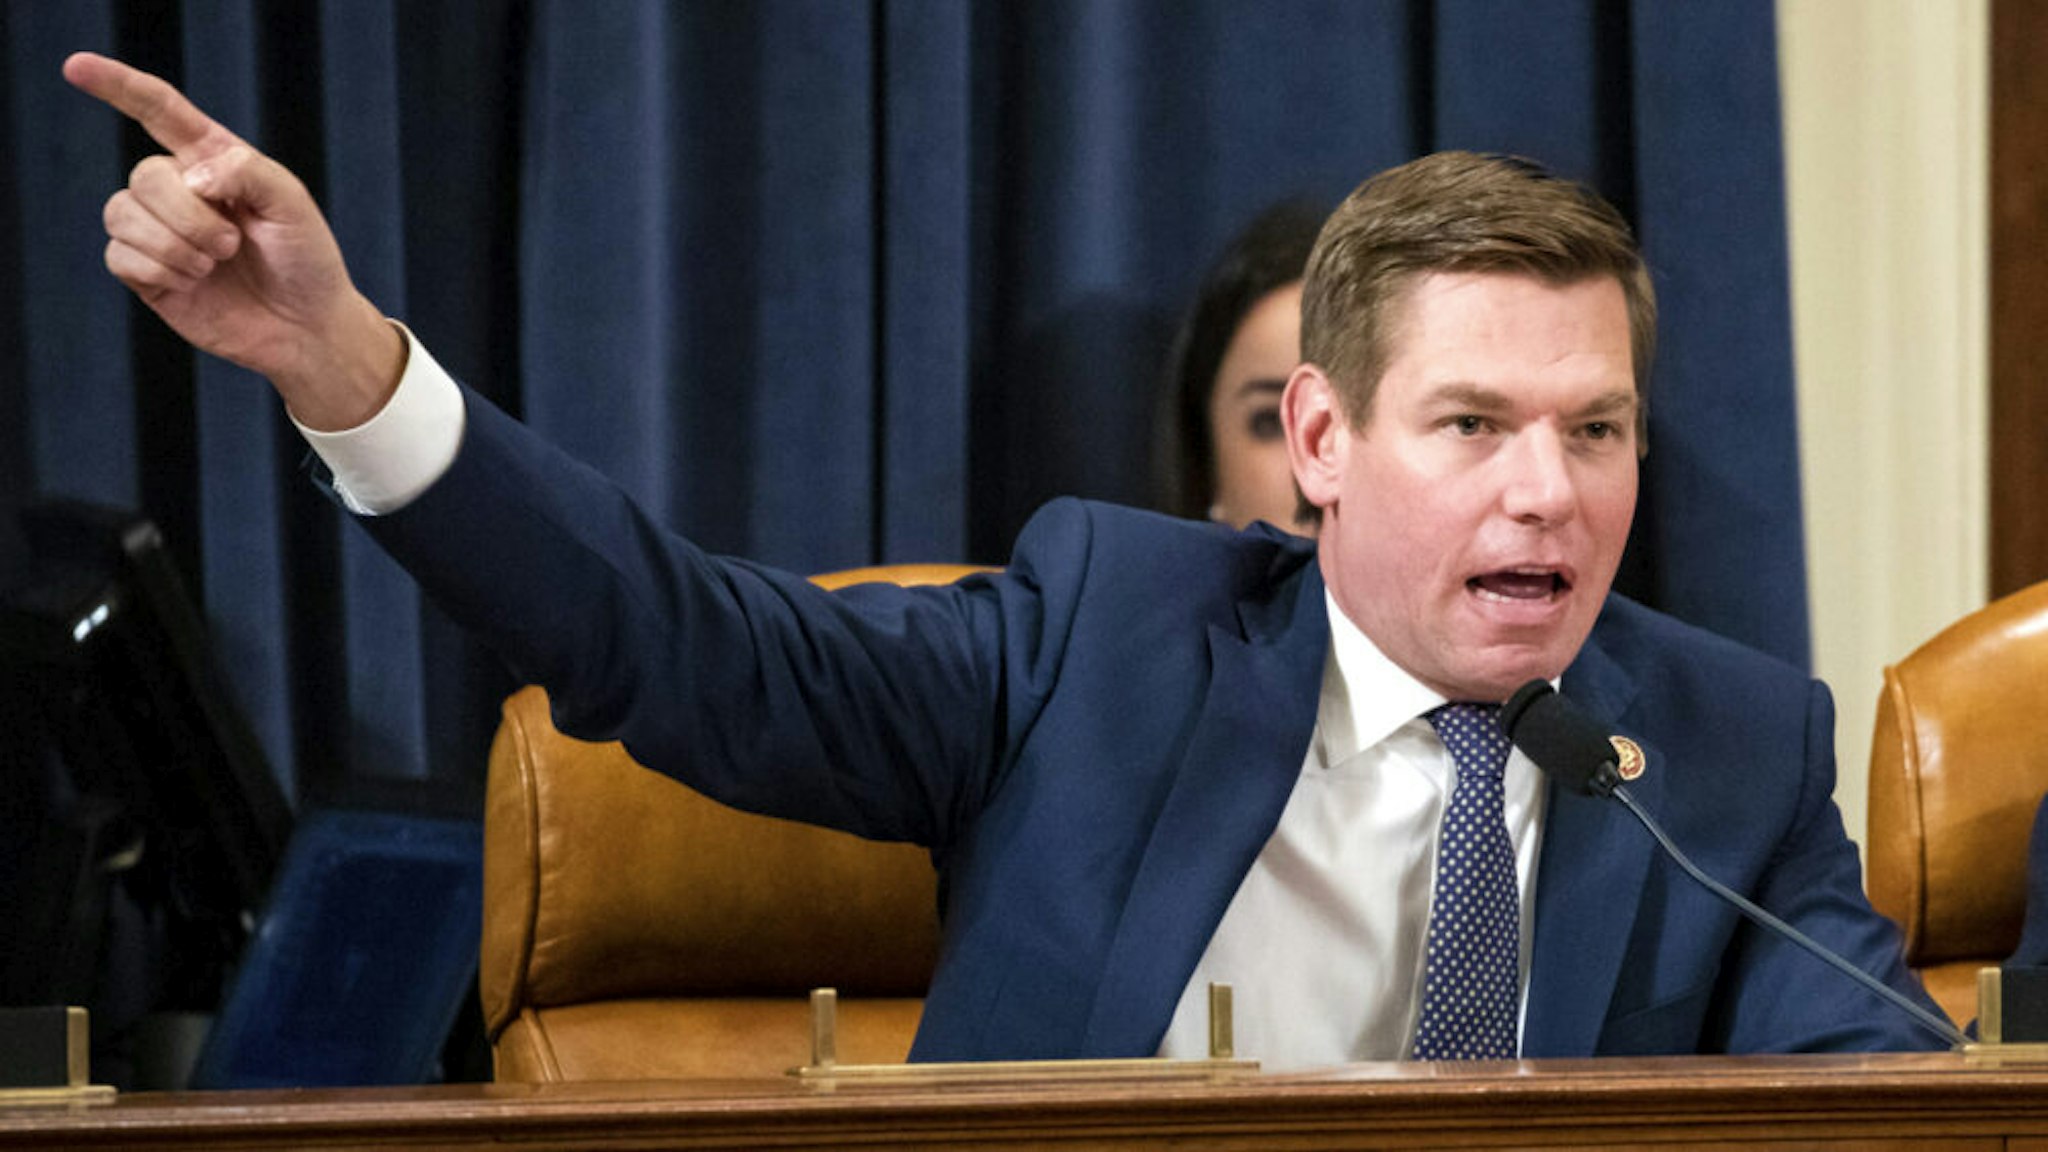 WASHINGTON, DC - NOVEMBER 20: U.S. Rep. Eric Swalwell (D-CA) questions Gordon Sondland, the U.S ambassador to the European Union, during a hearing before the House Intelligence Committee in the Longworth House Office Building on Capitol Hill November 20, 2019 in Washington, DC. The committee heard testimony during the fourth day of open hearings in the impeachment inquiry against U.S. President Donald Trump, whom House Democrats say held back U.S. military aid for Ukraine while demanding it investigate his political rivals.